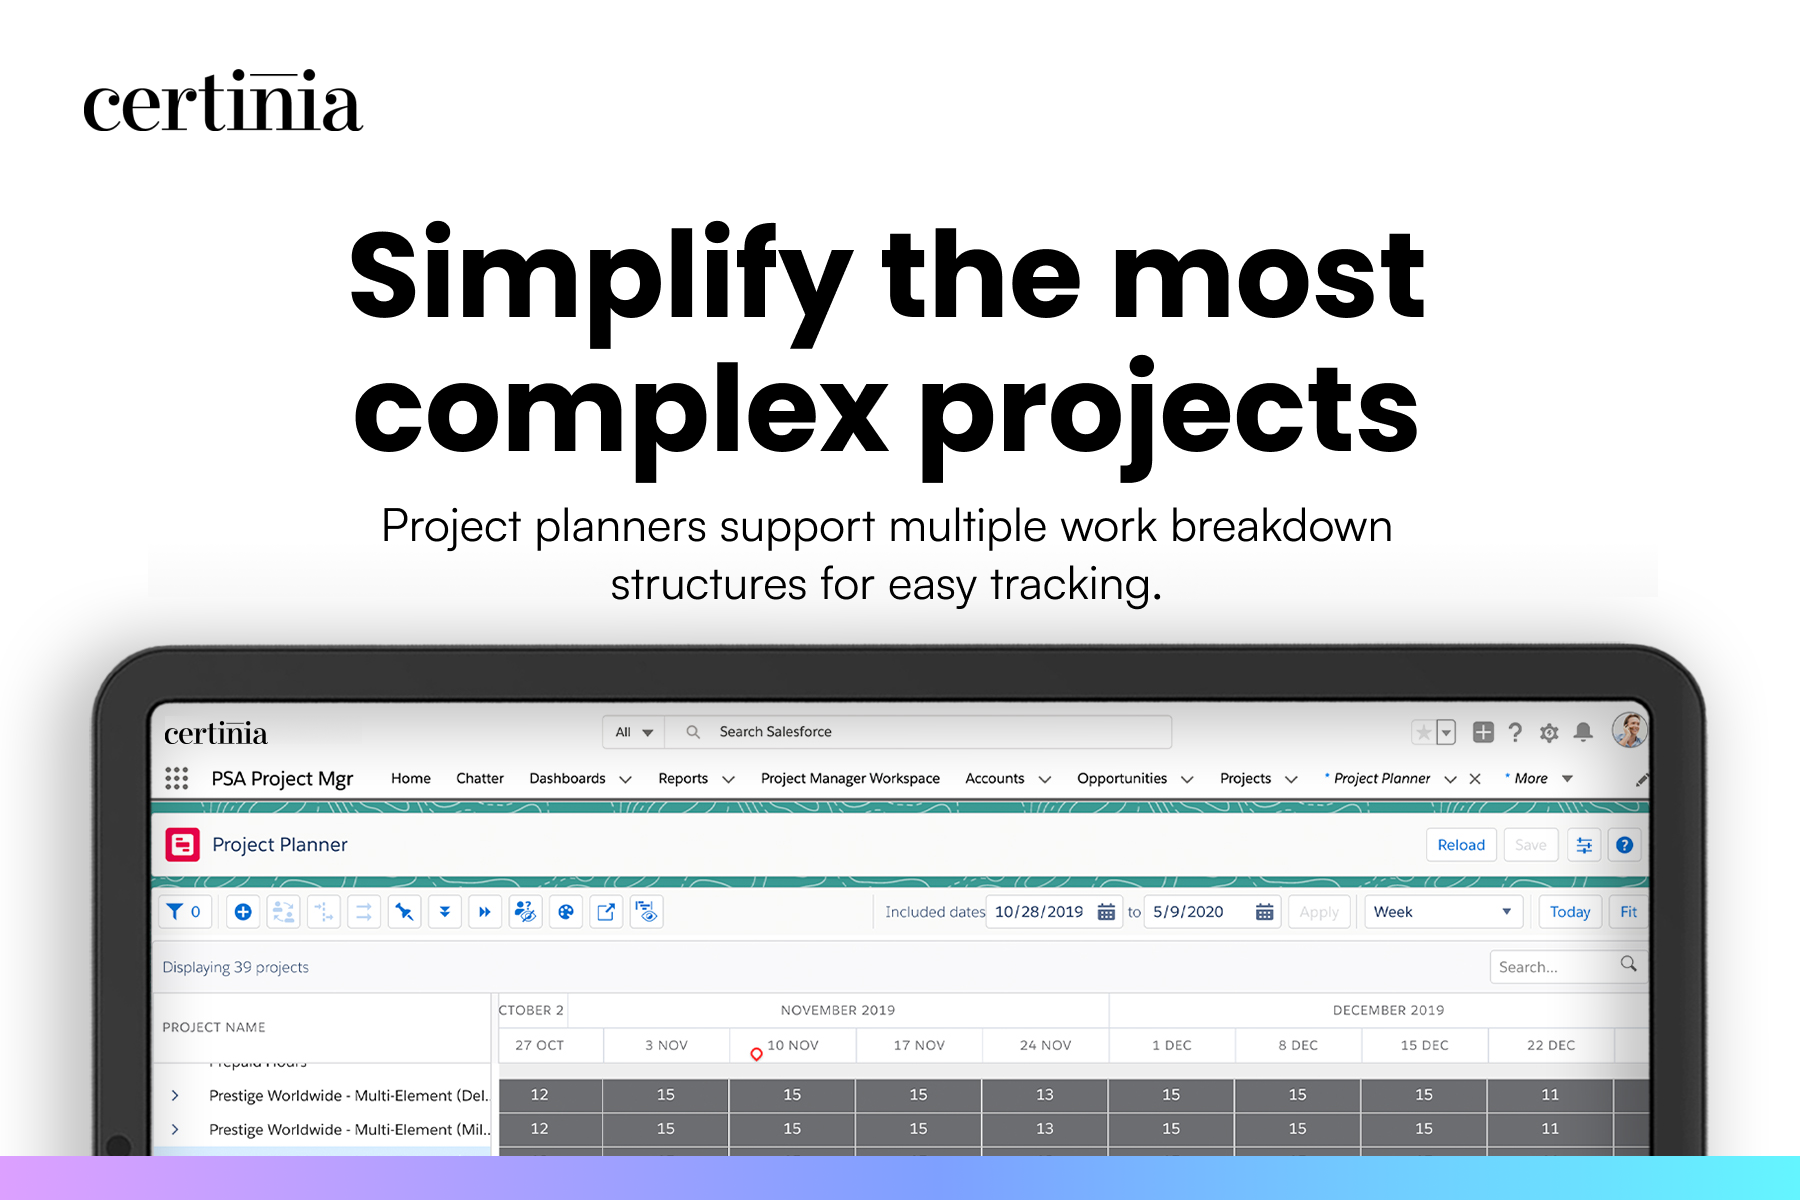 Project planners support multiple work breakdown structures for easy tracking.